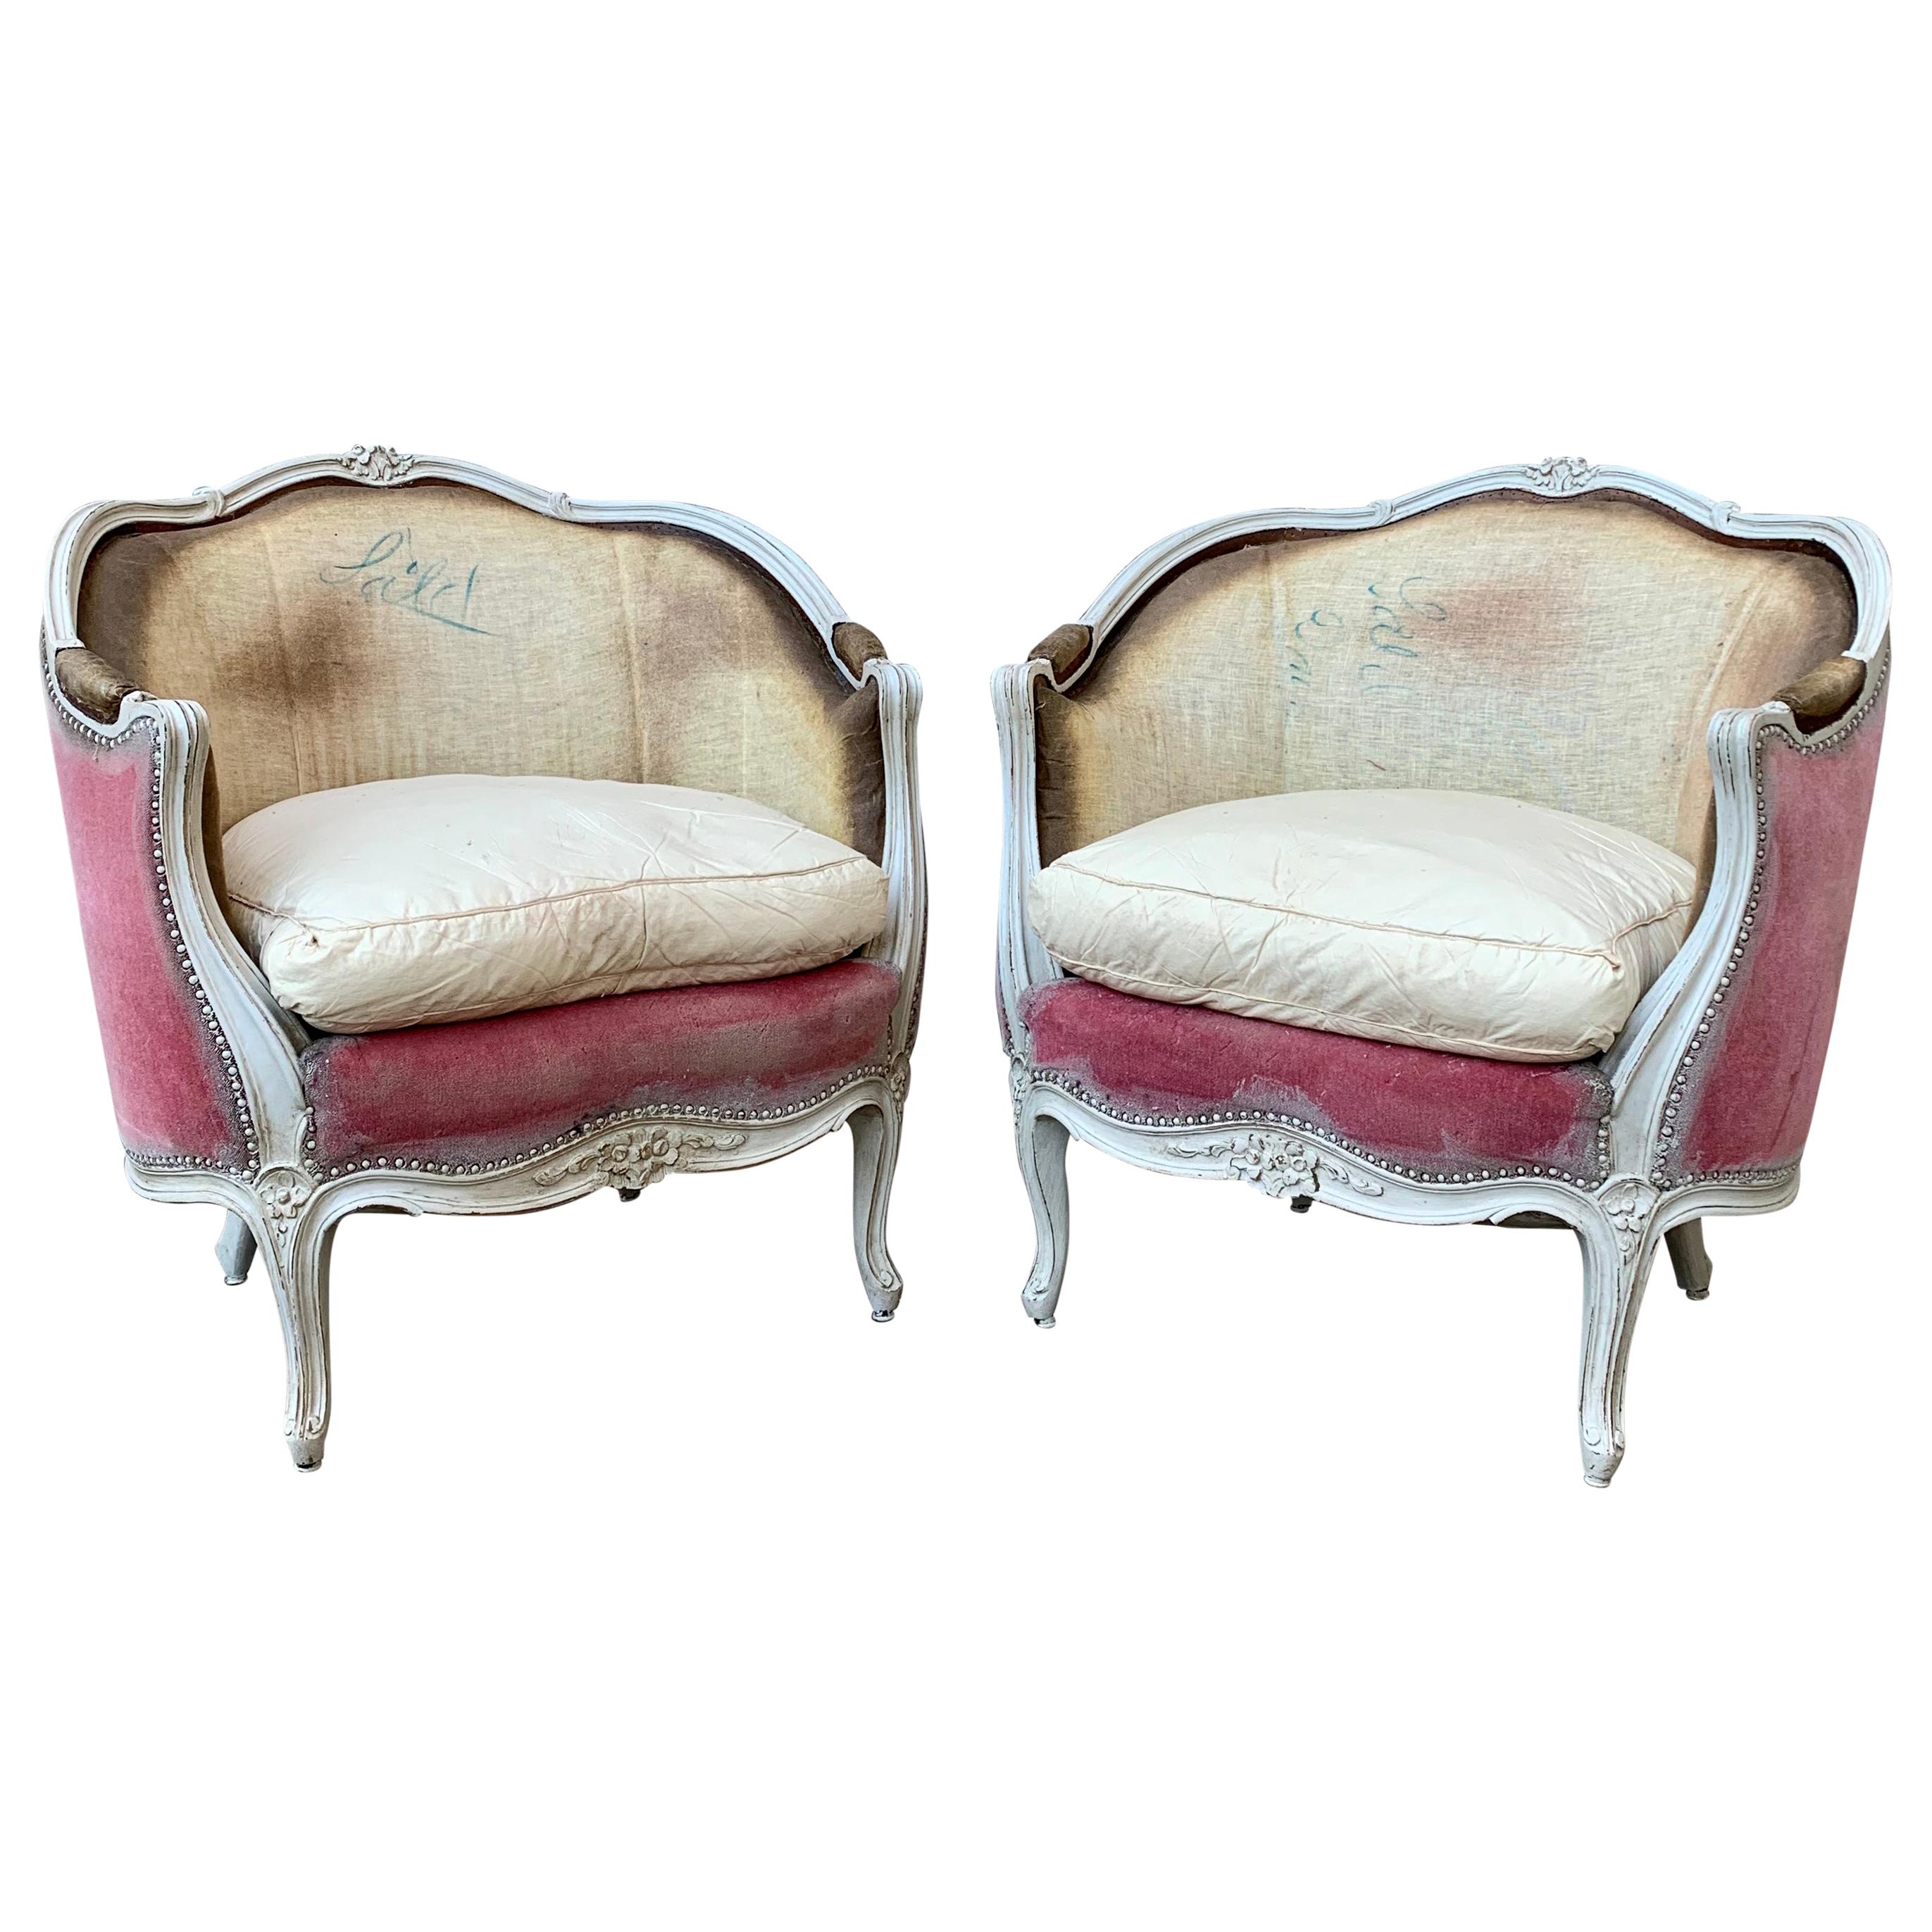 Pair of Swedish White Painted Bergère Armchairs, Rococo Style